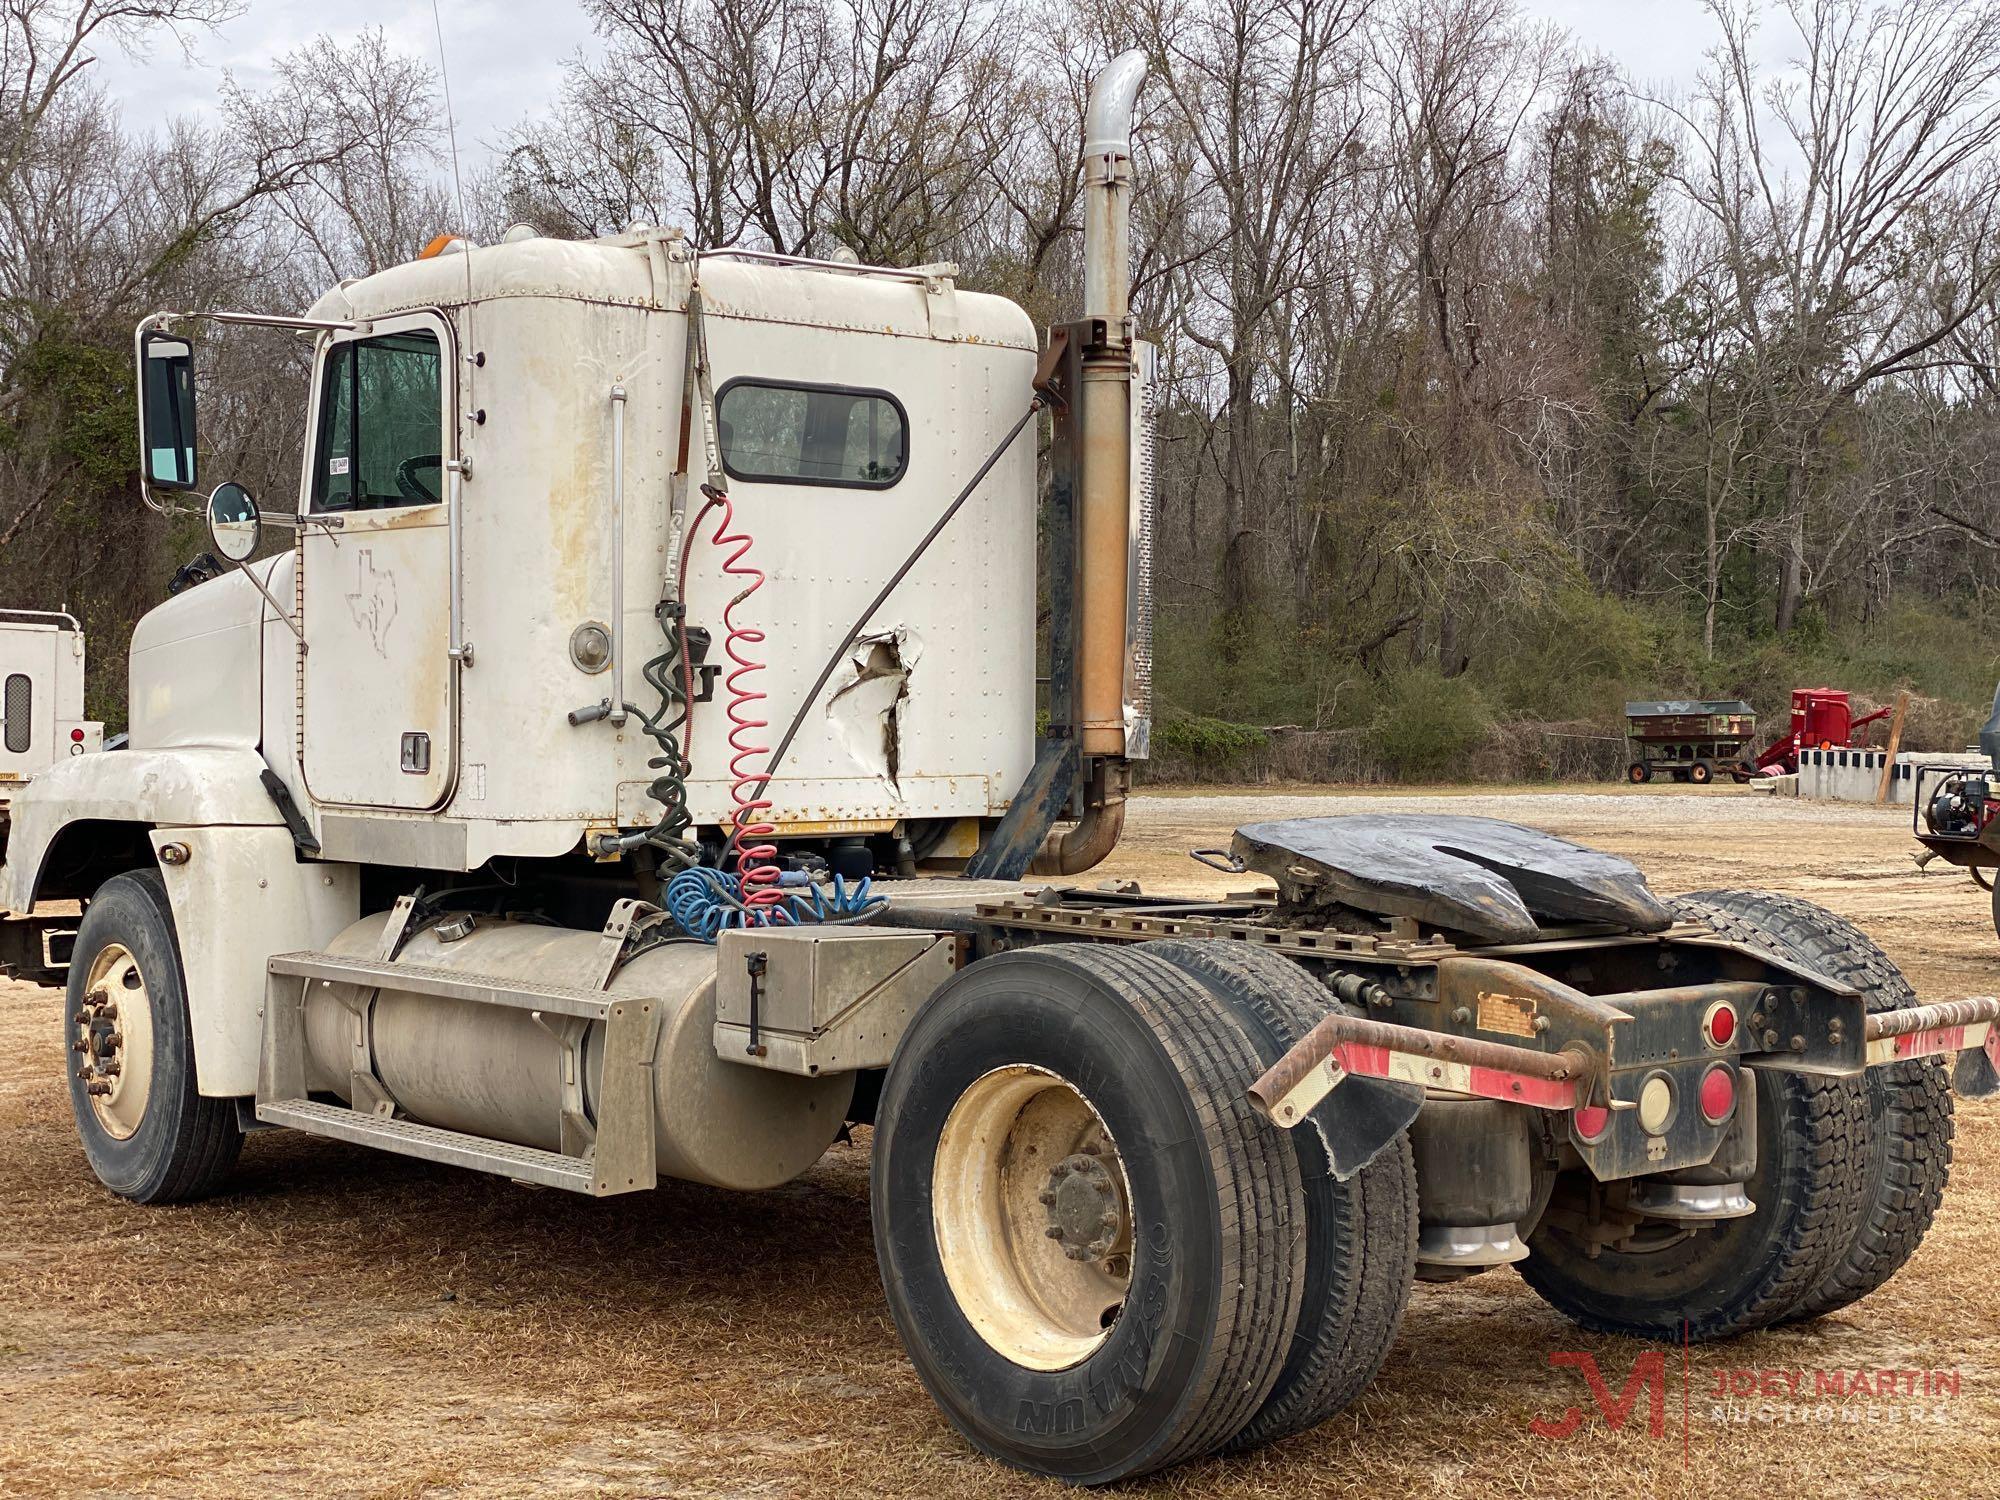 1996 FREIGHTLINER S/A DAY CAB TRUCK TRACTOR